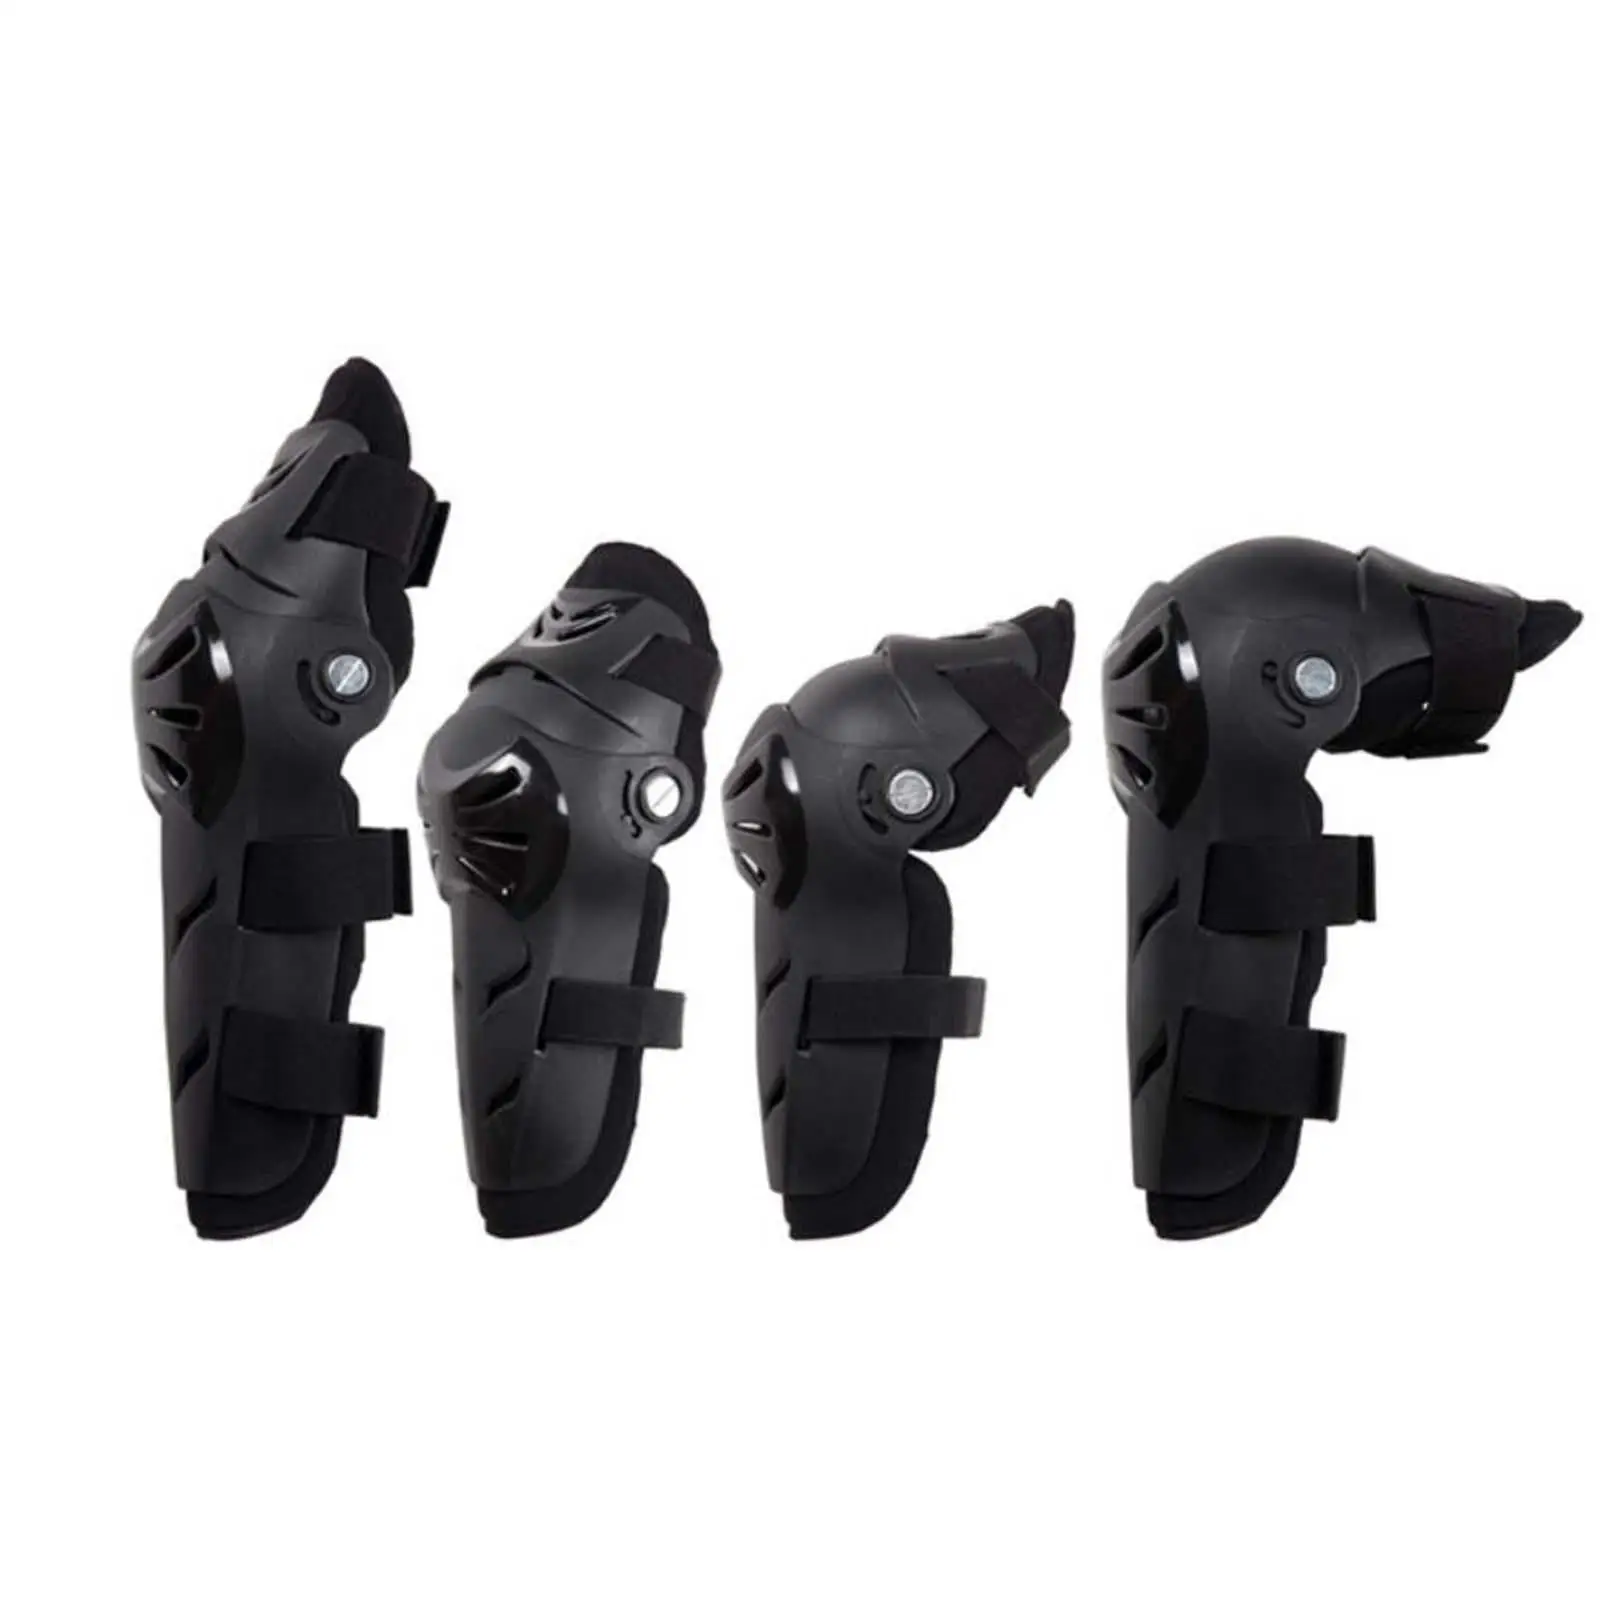 4 Pieces Motorcycle Knee Shin Guards Cusion for Skating Motocross Sport